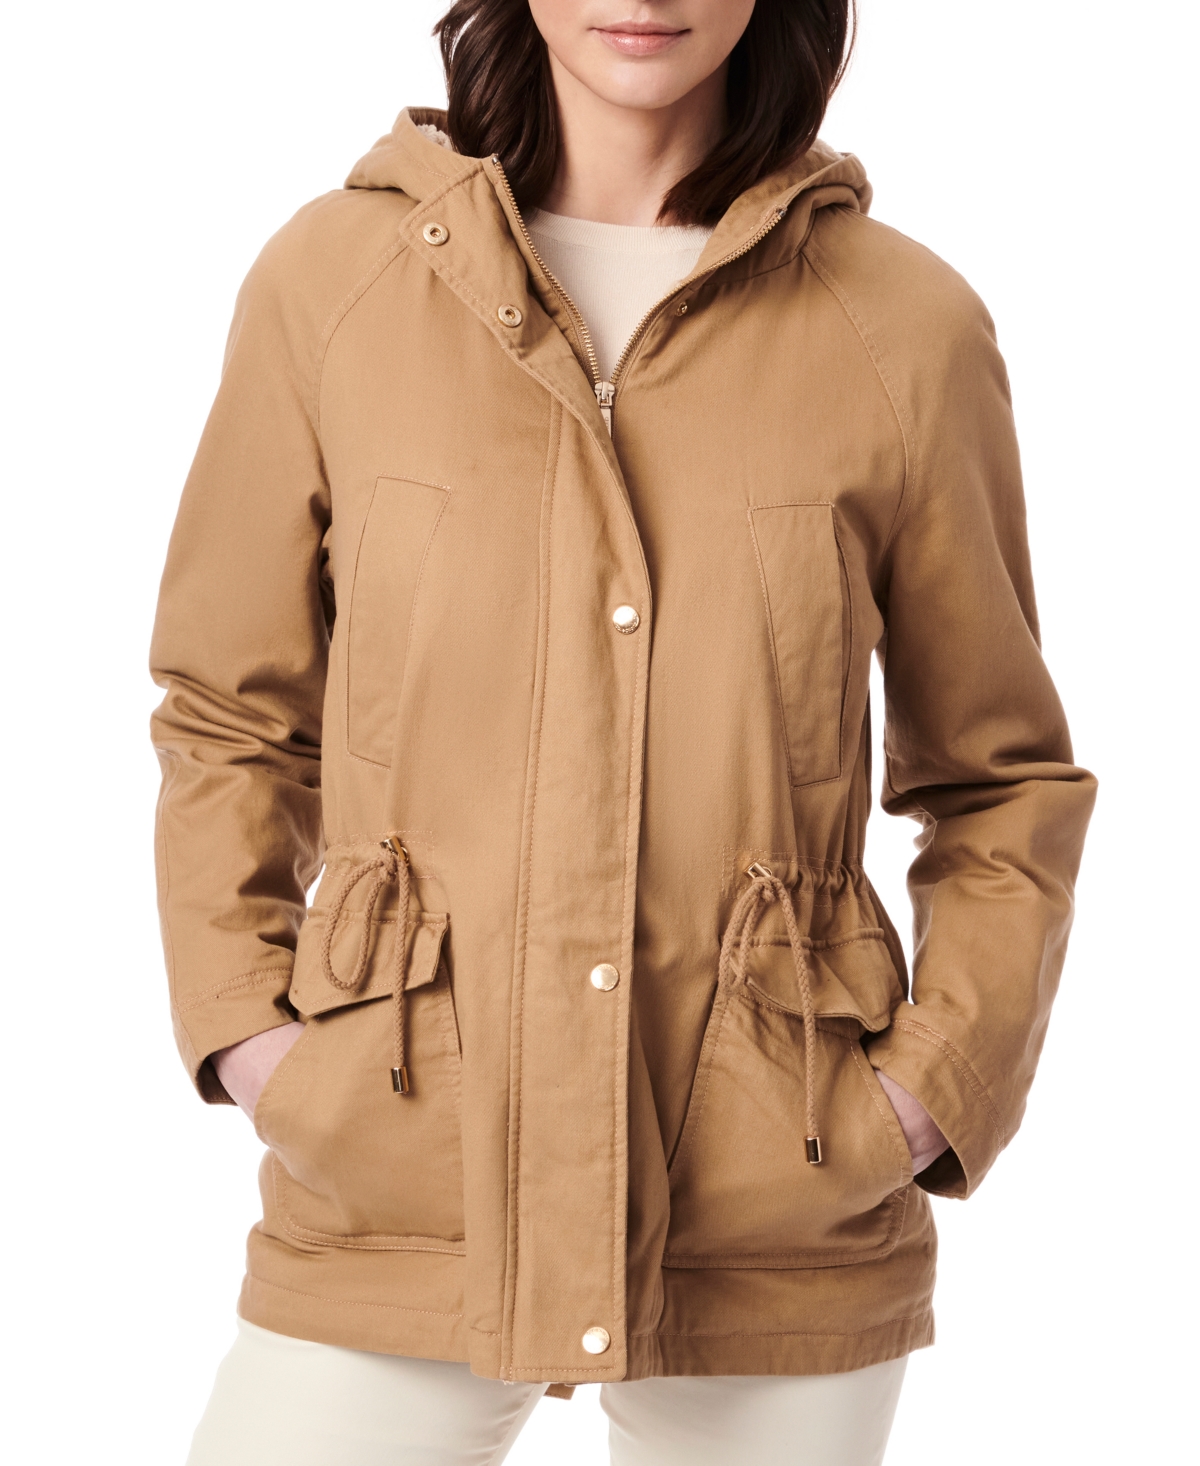 Collection B Juniors' Trendy Hooded Drawstring Waist Anorak Parka Jacket, Created for Macy's